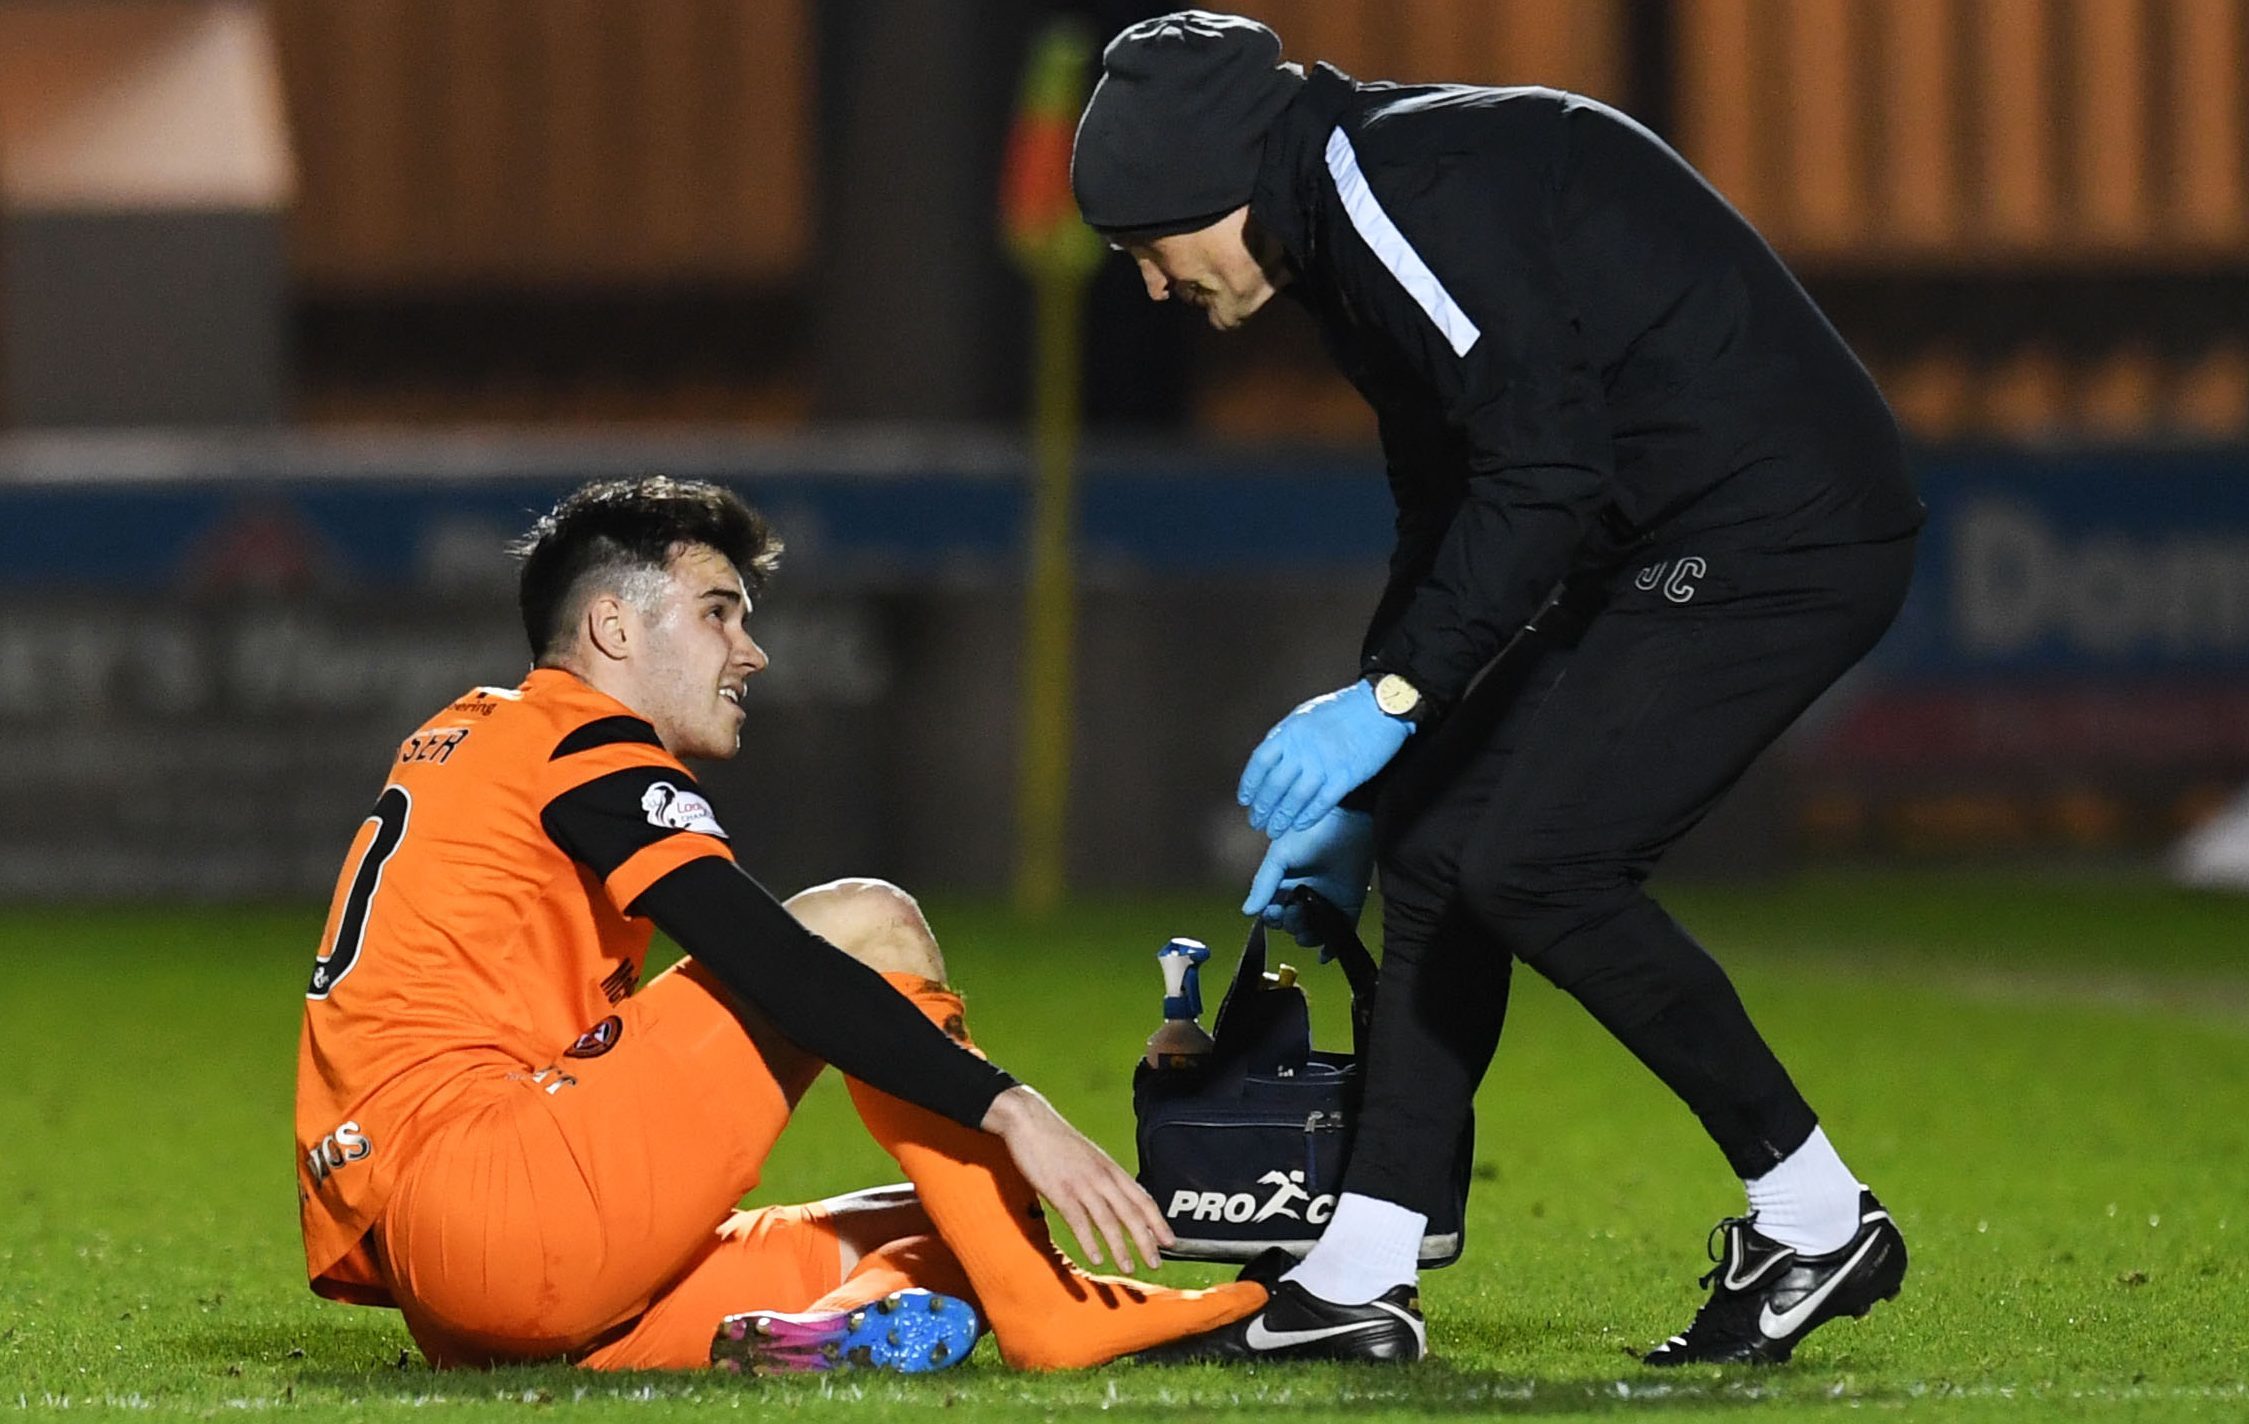 Scott Fraser receiving treatment from the club physio.